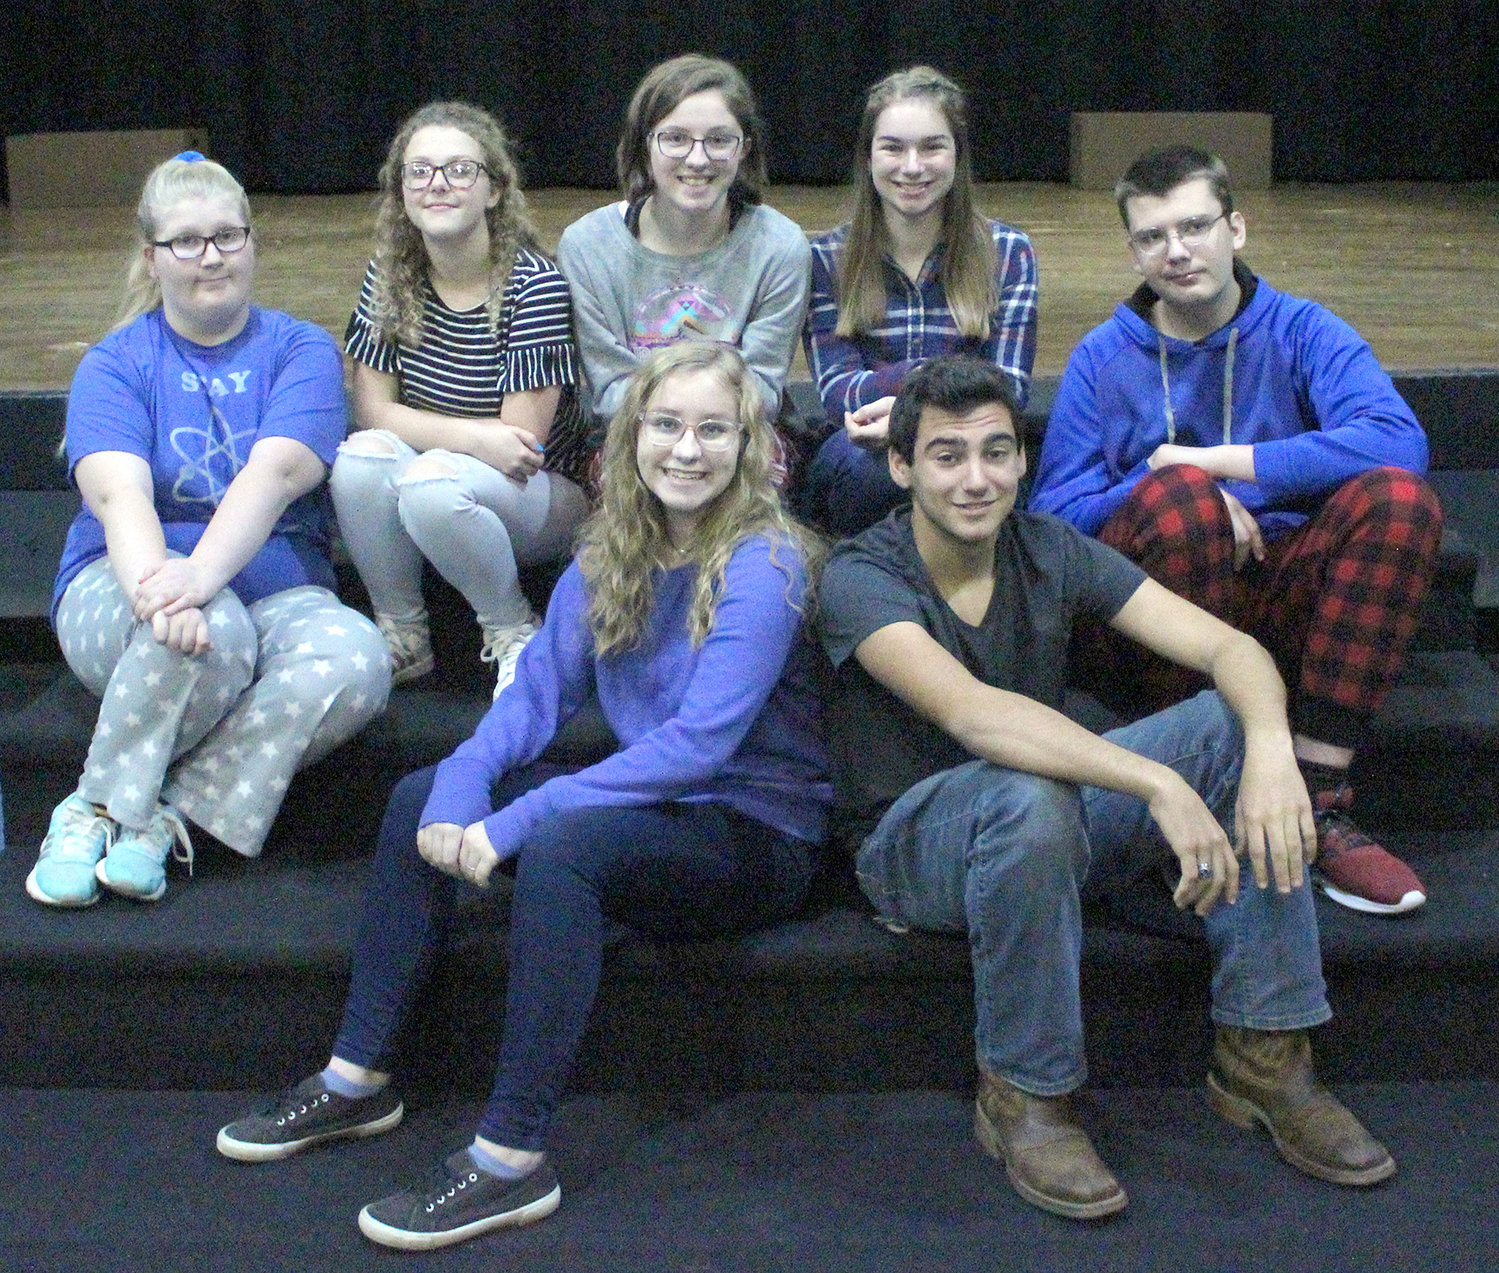 Drama cast members are, from left, front row, Meghan Sliz and Blake Harris; and back row, Brenna Henning, Kathryn McCall, Bailey Jeffers, Ava Barger and Michael Crowder. Not pictured is Ashley McMichael.